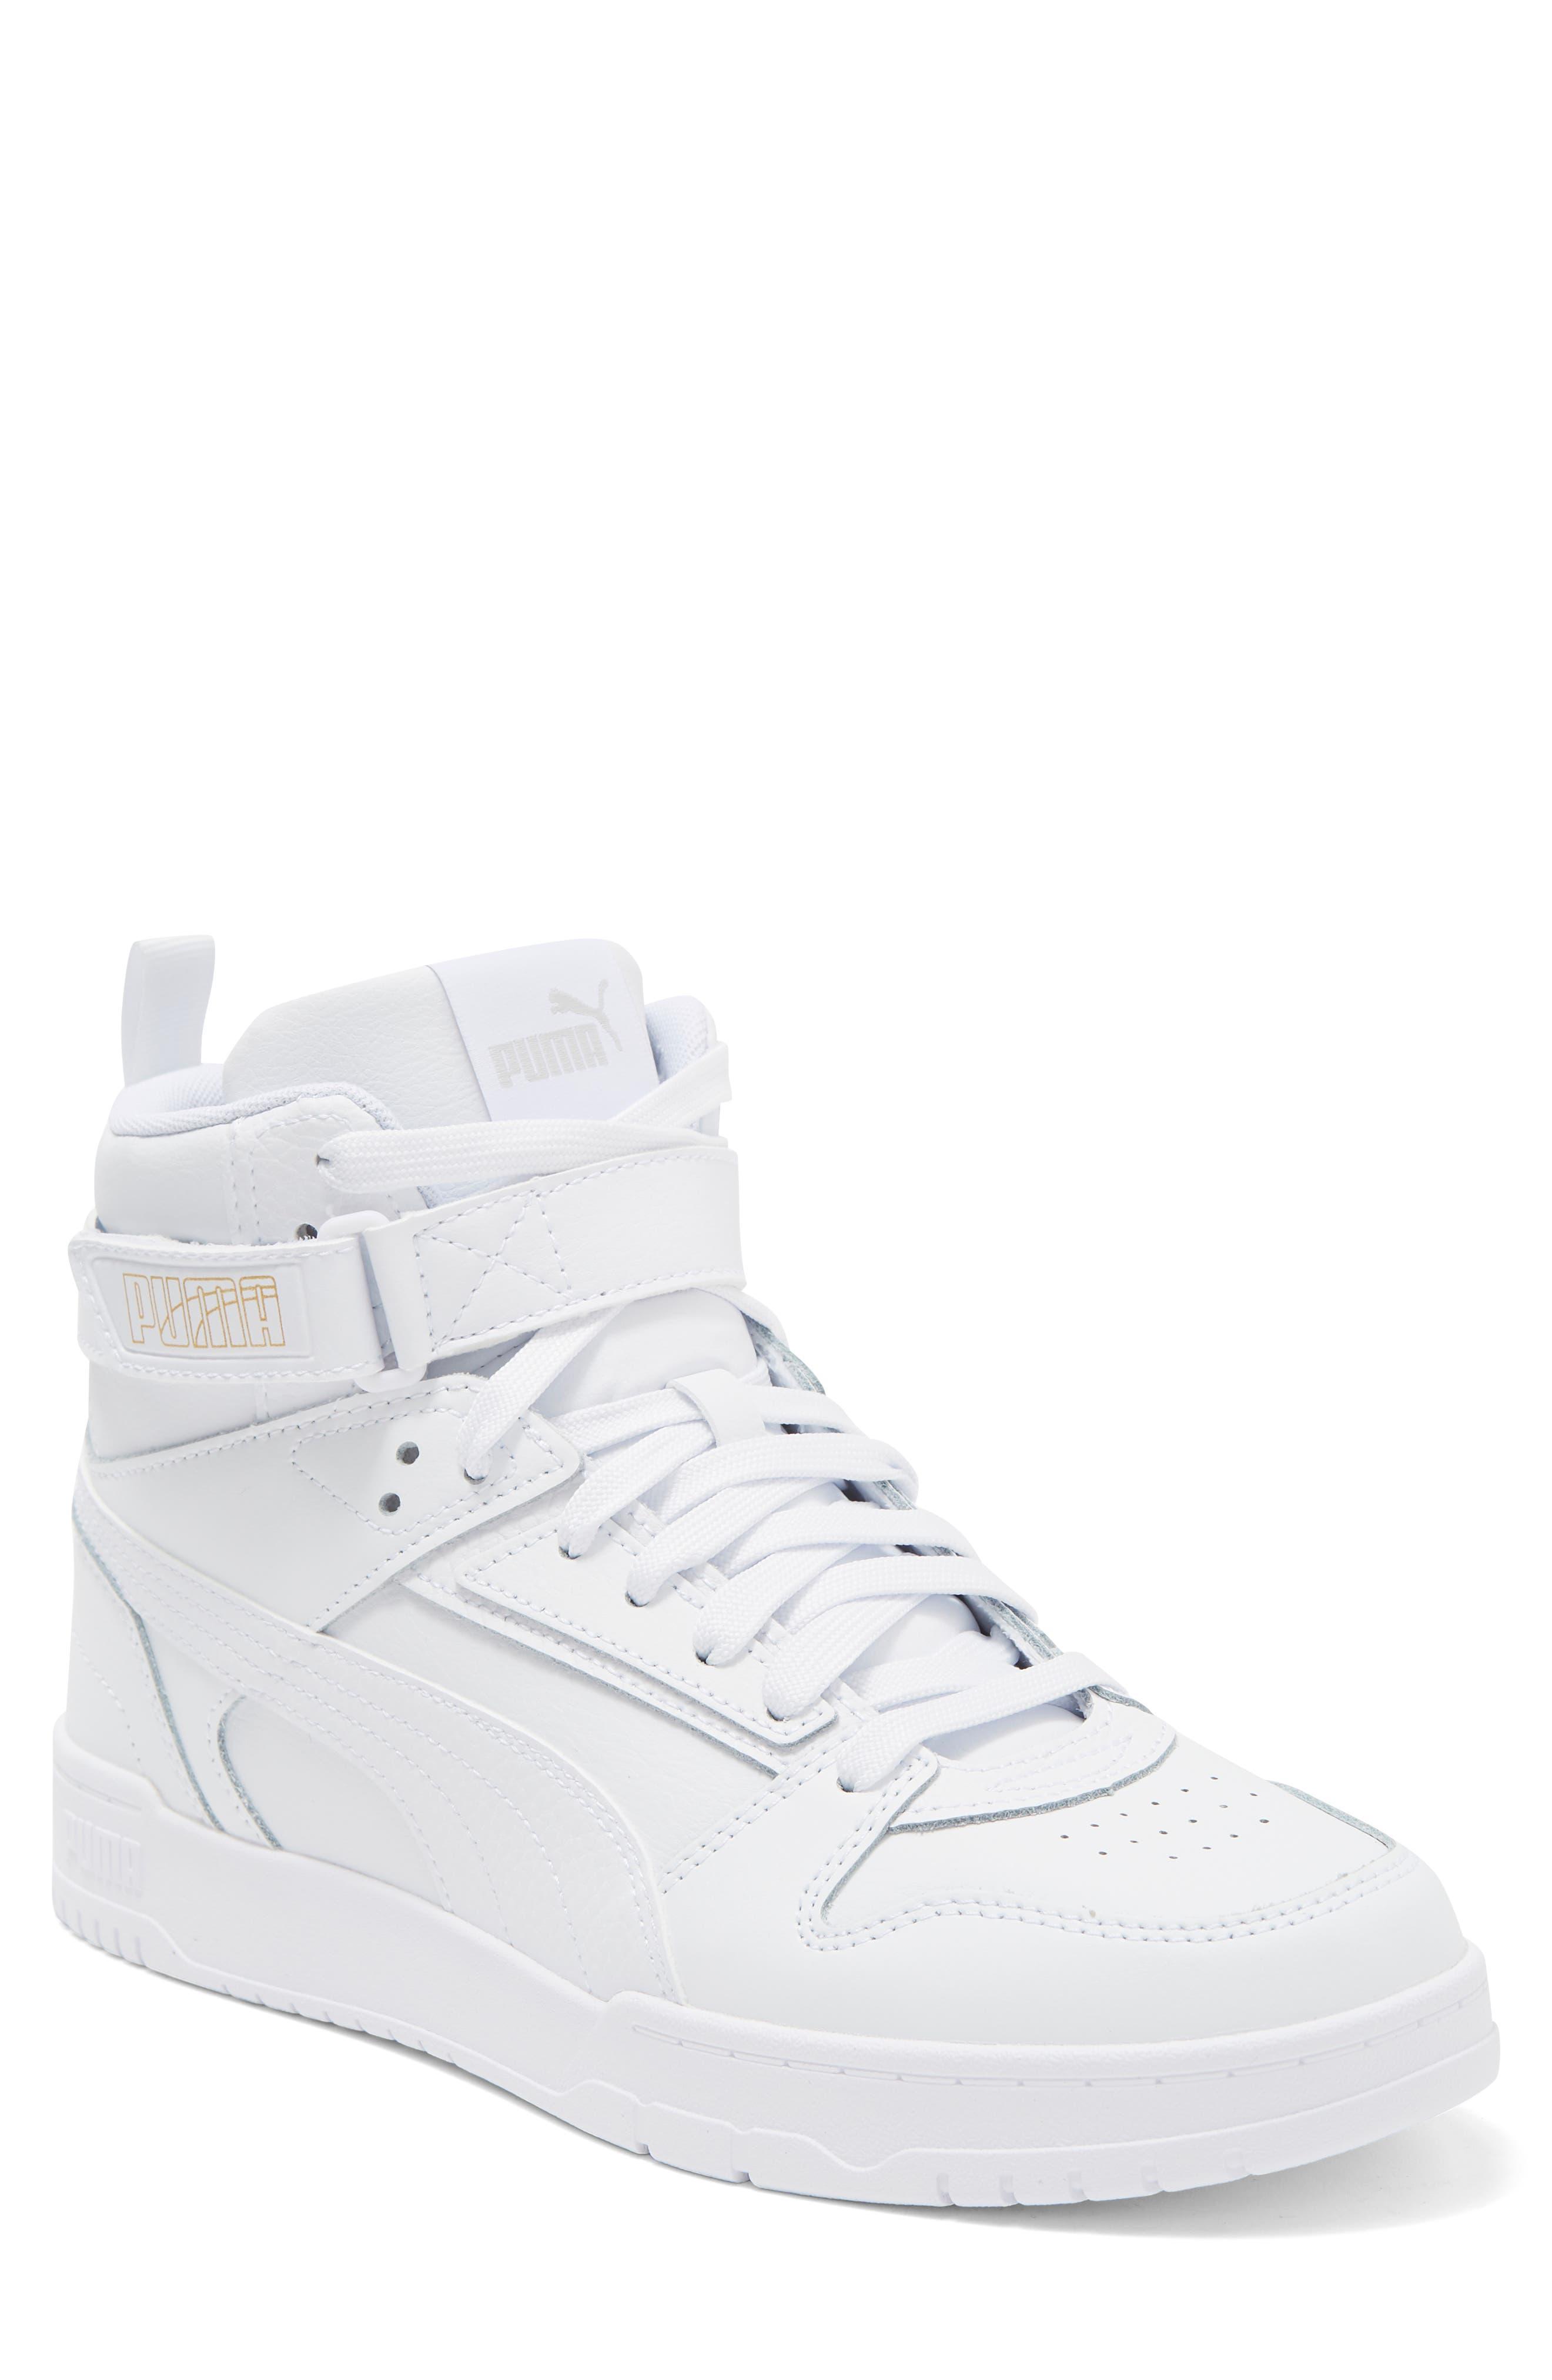 PUMA Rbd Game Mid Top Sneaker In White-white- Team Gold At Nordstrom ...